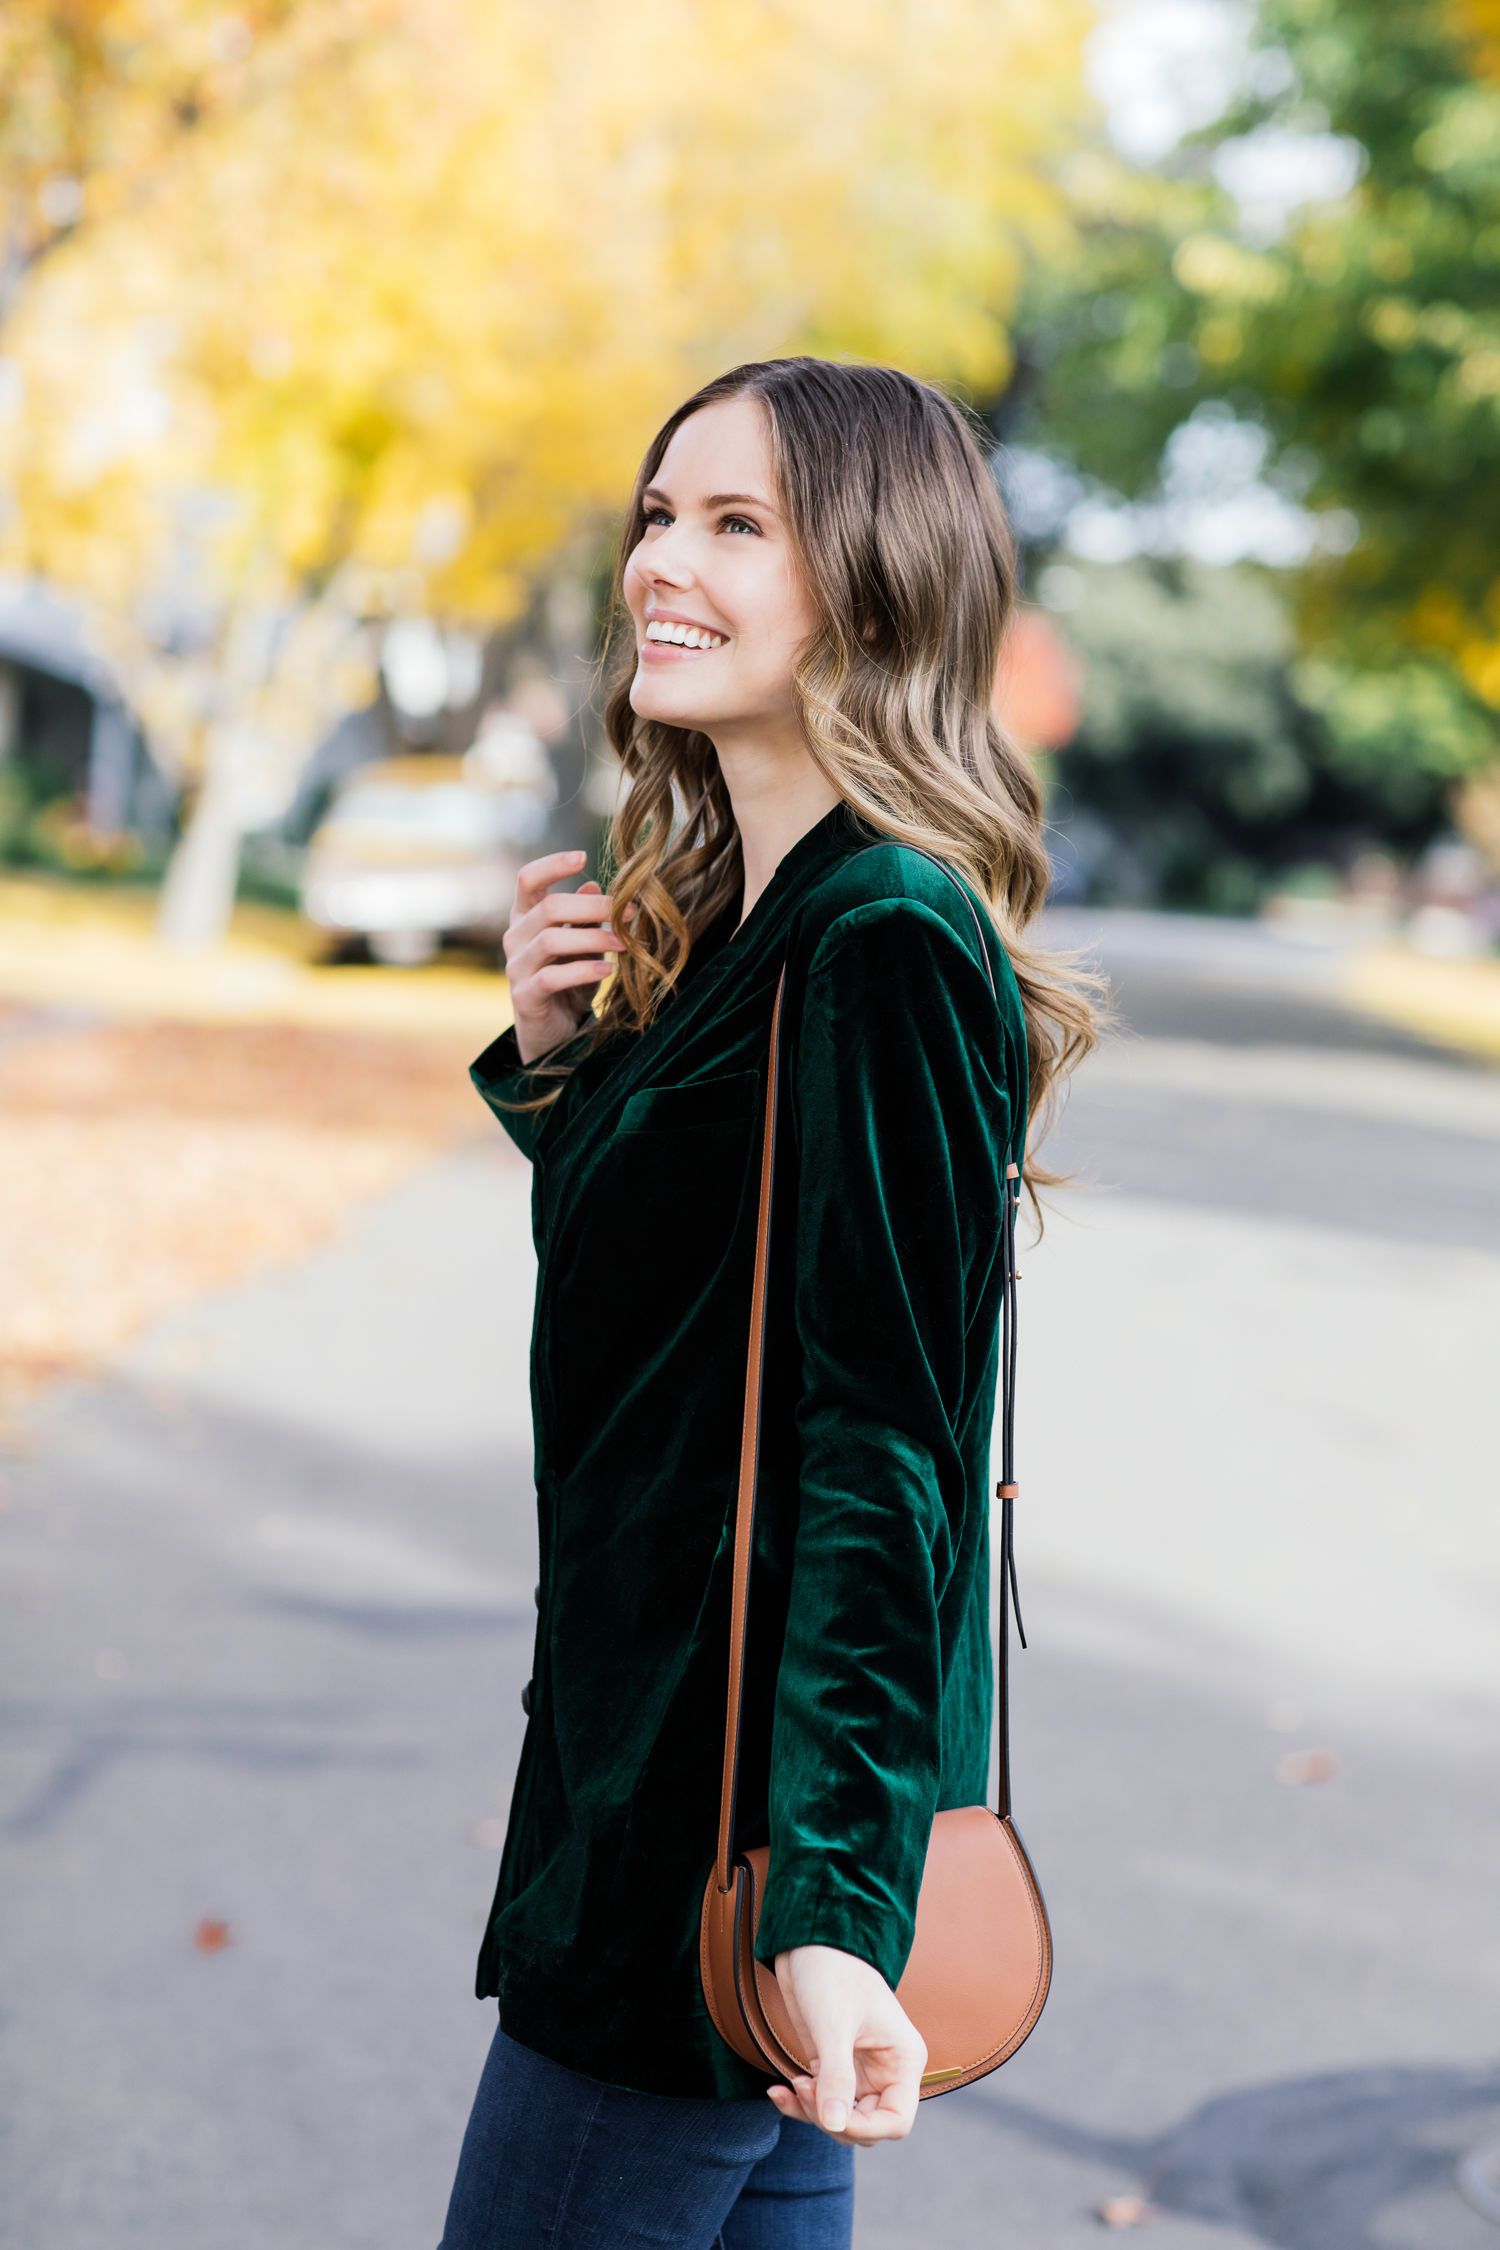 Alyssa Campanella of The A List blog shares the best velvet blazers for the holidays wearing On Parle de Vous green blazer, Cuyana mini saddle bag, and Sezane Emilie boots.